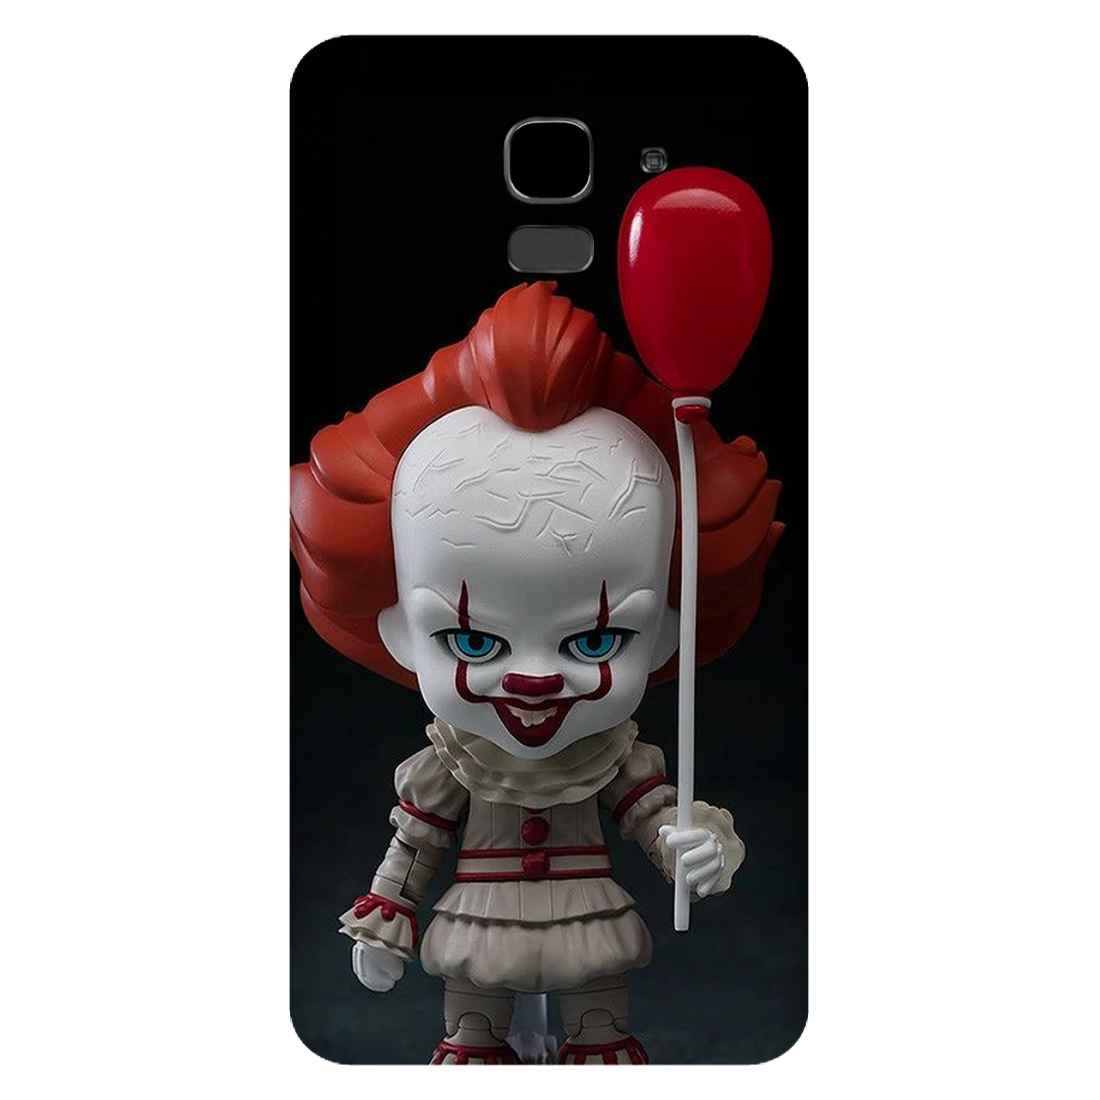 Pennywise Toy Figure Case Samsung Galaxy J6